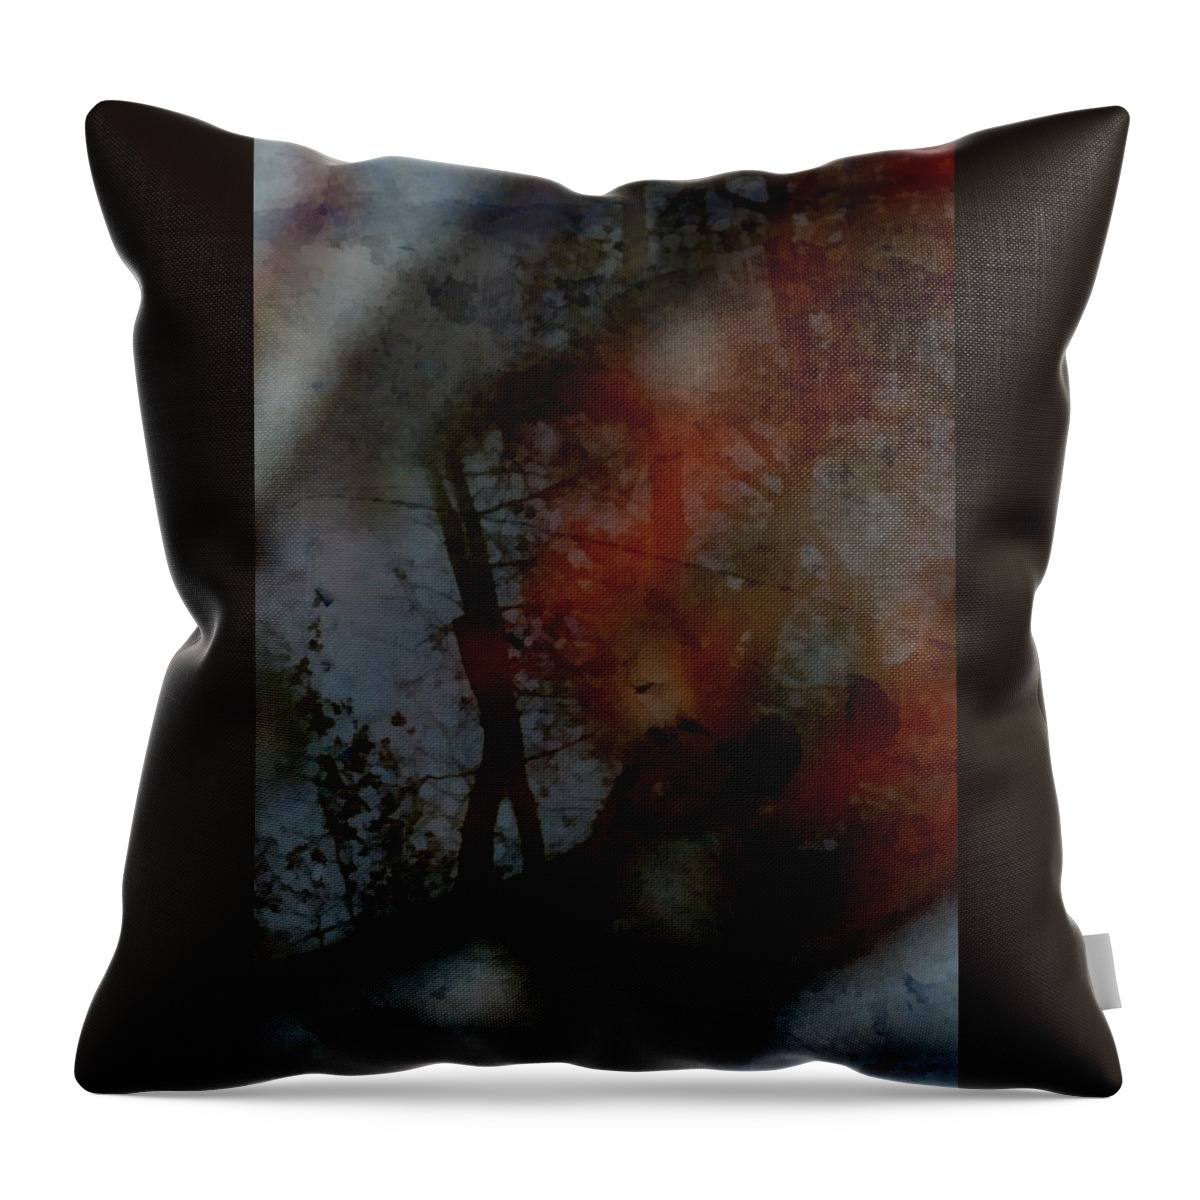 Landscape Throw Pillow featuring the photograph Autumn Abstract by Photographic Arts And Design Studio